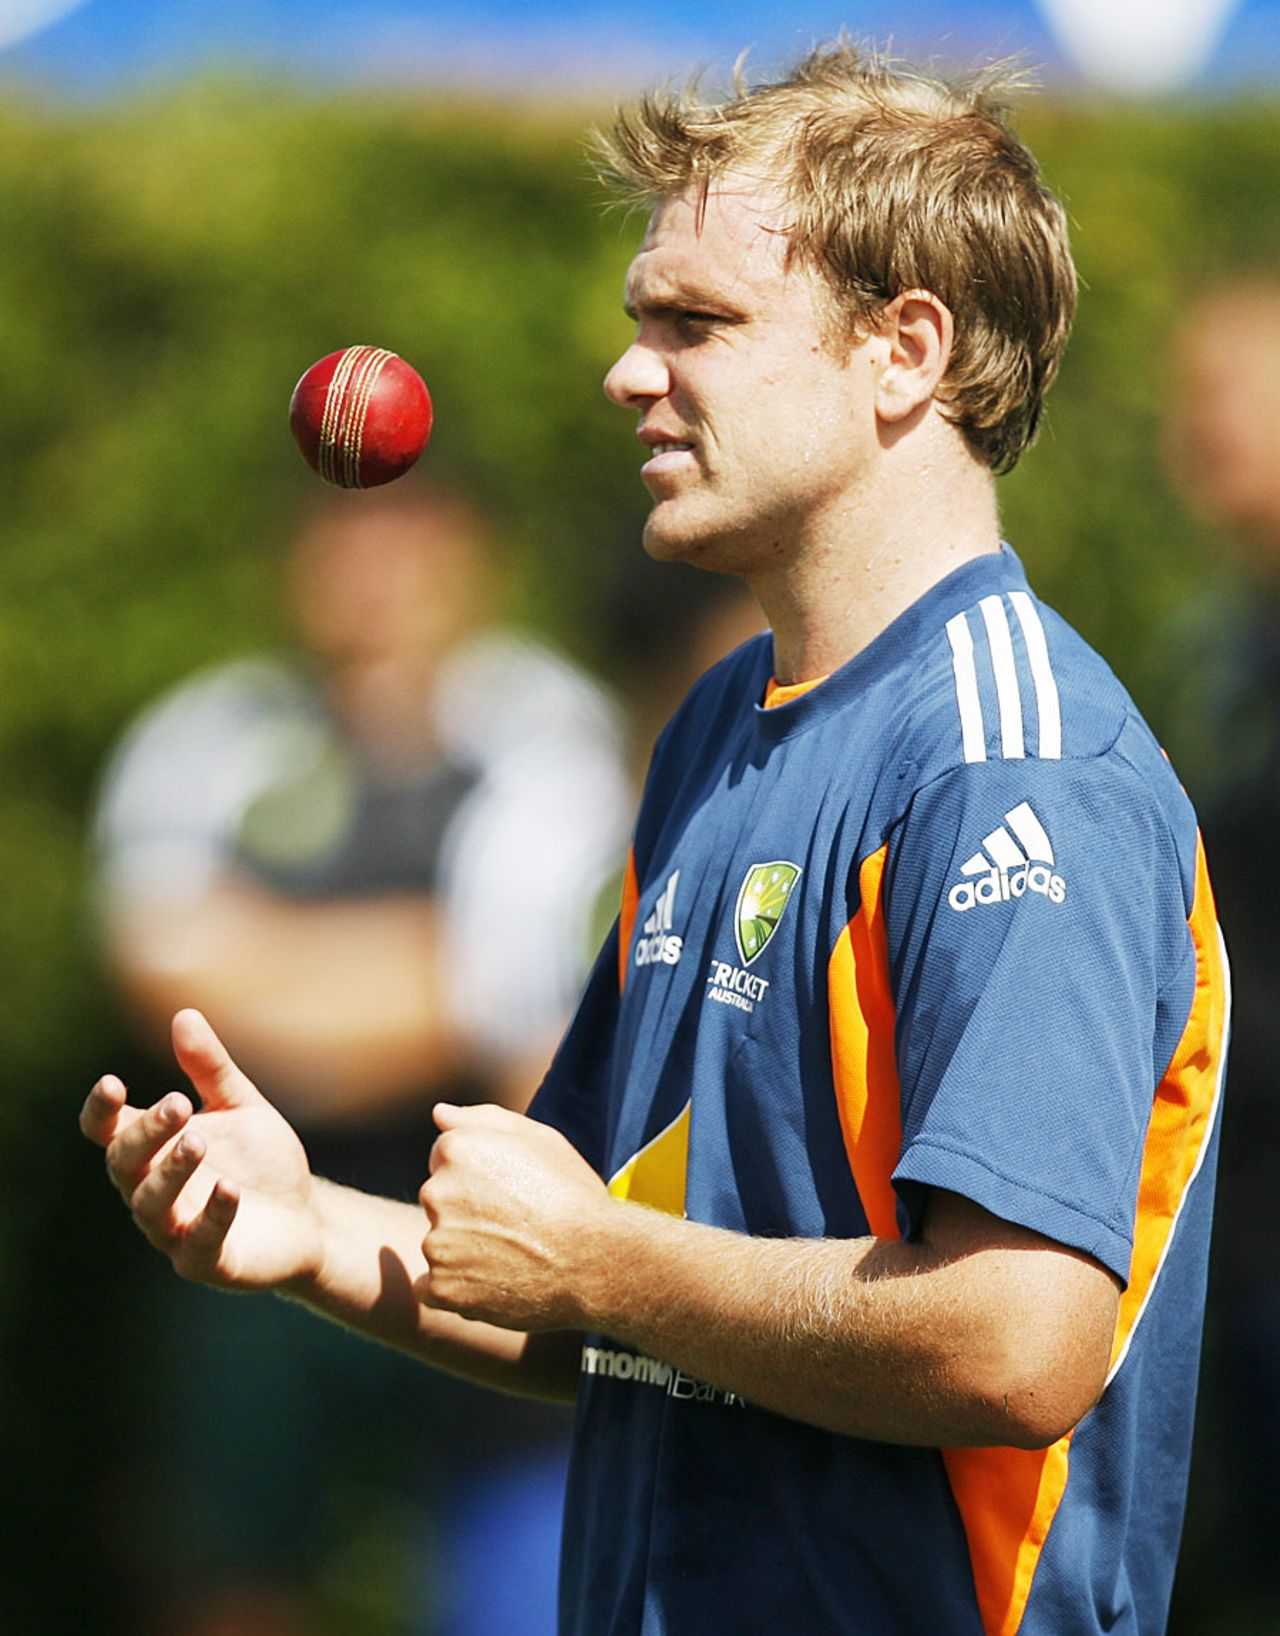 Michael Beer will make his debut during the fifth Ashes Test in Sydney, Sydney, January 2, 2011